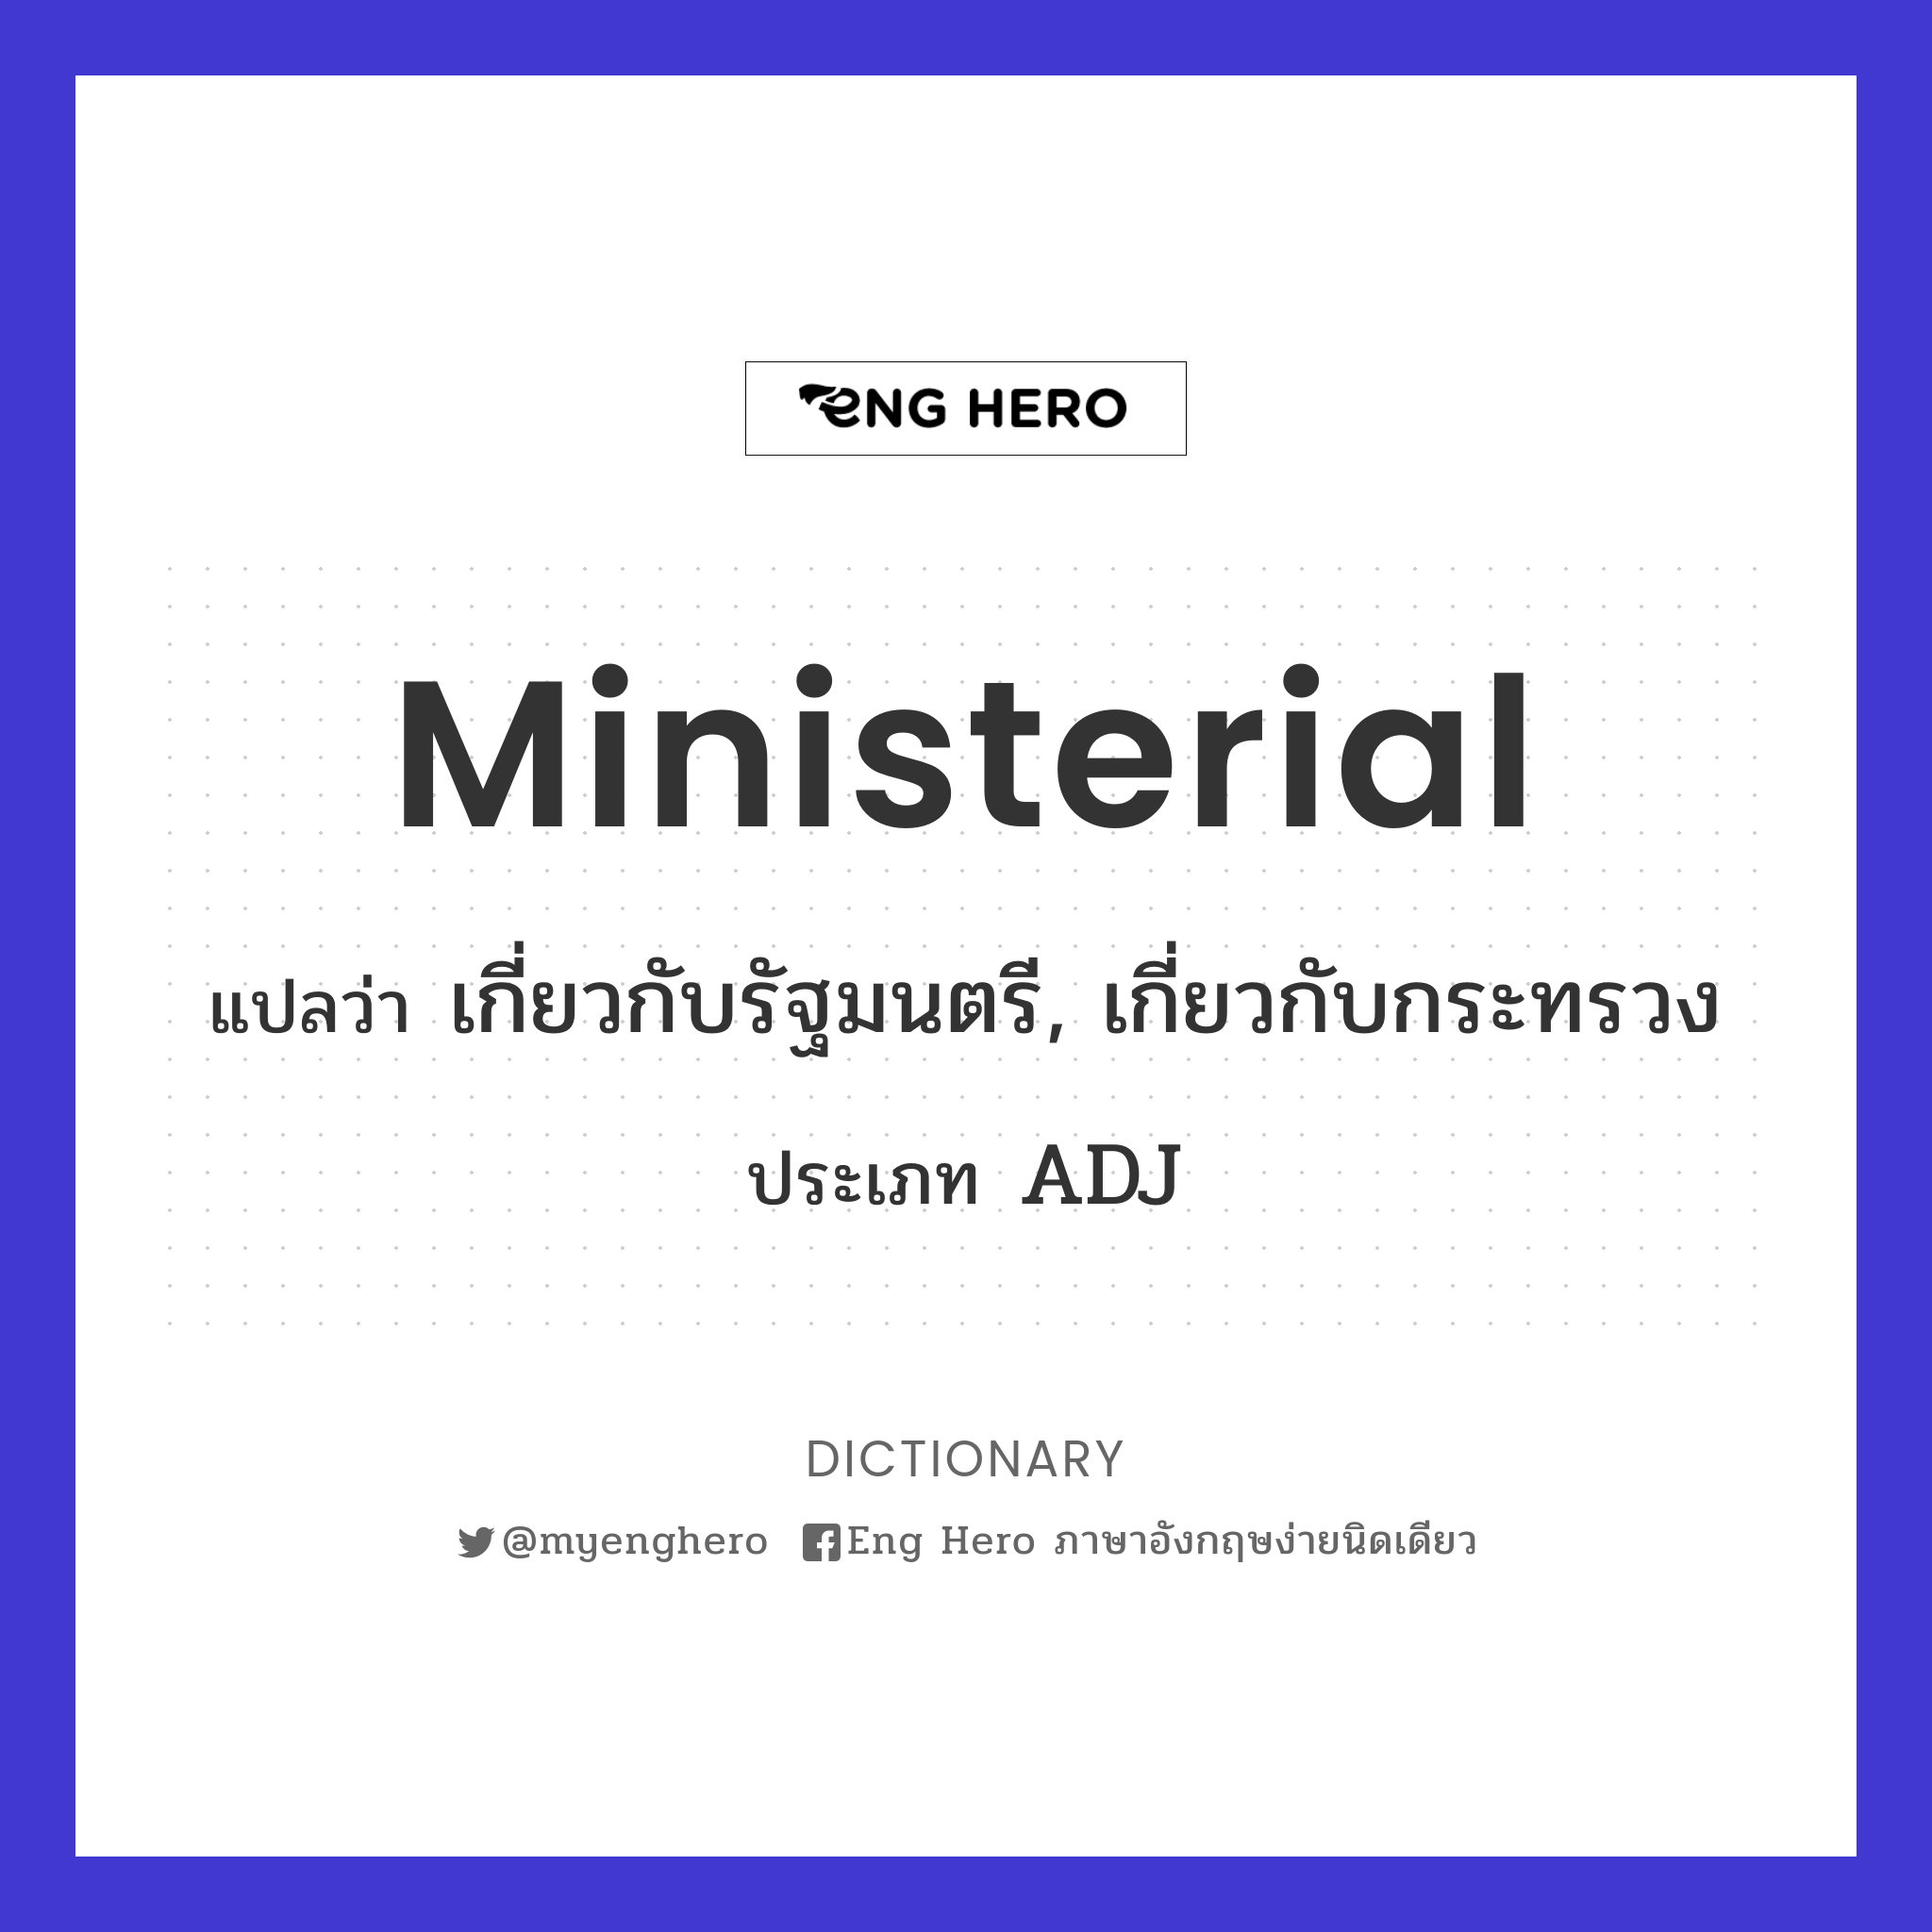 ministerial